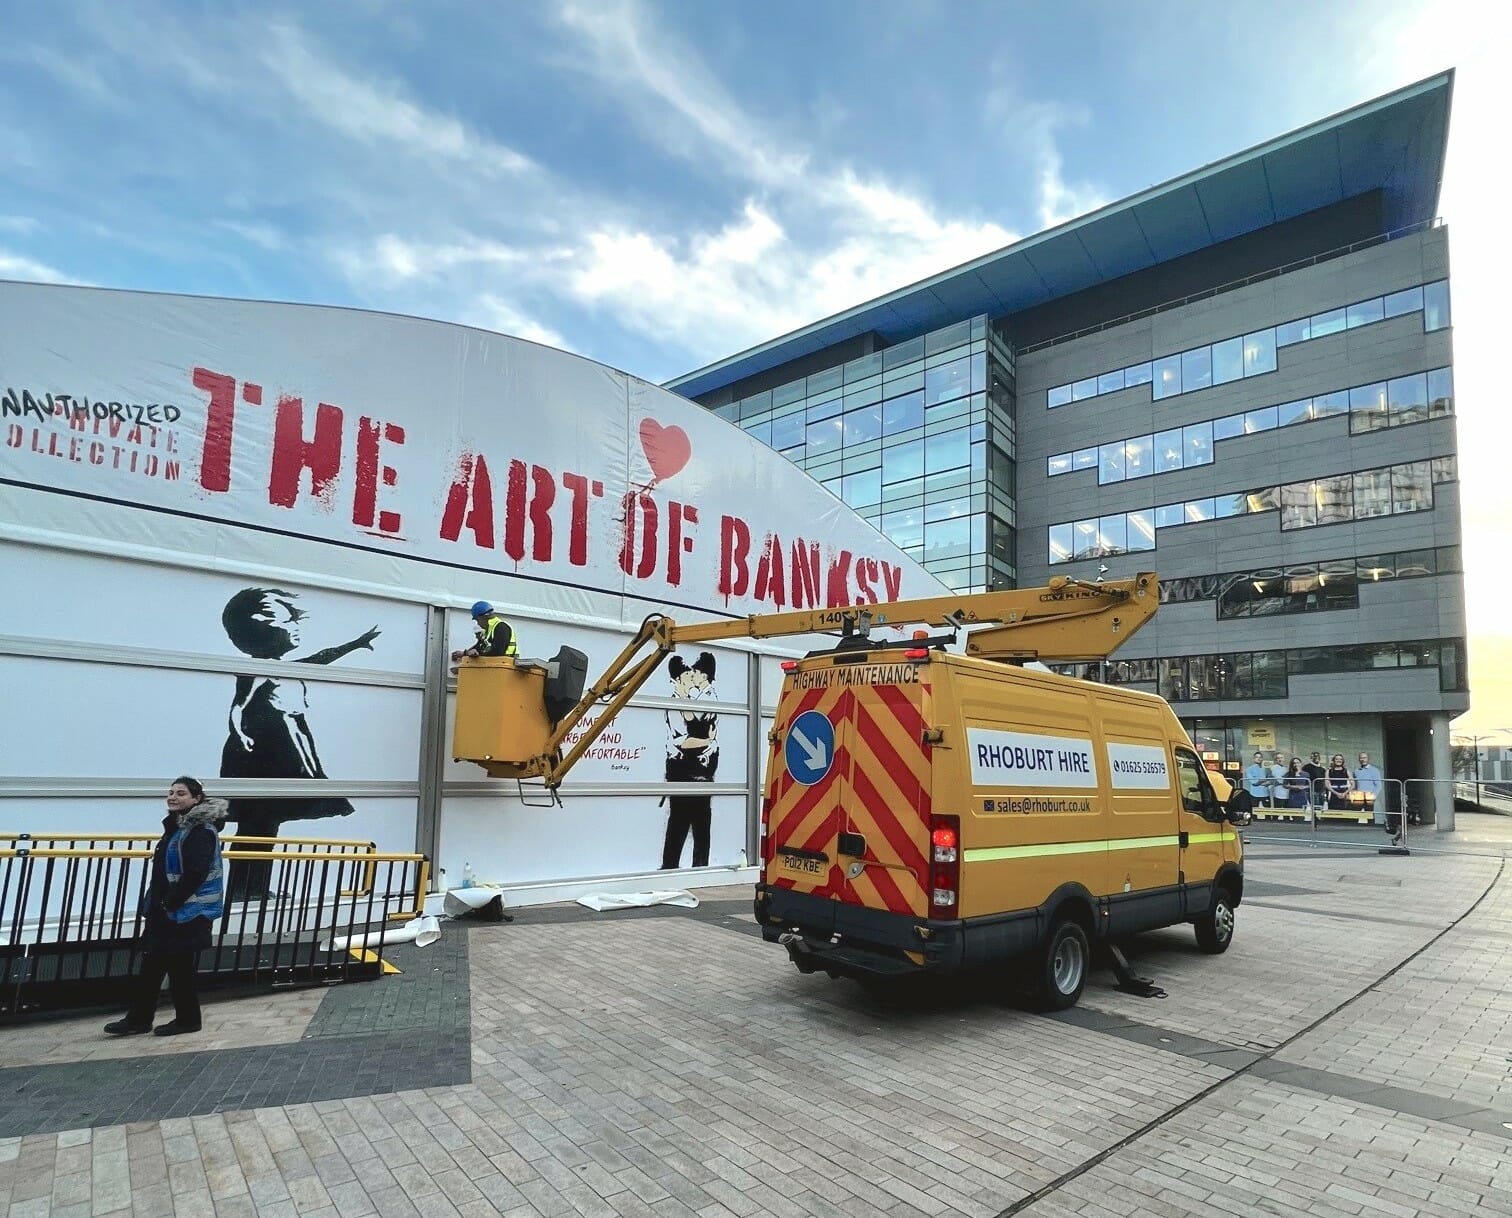 Hyfire and Advanced Protect The Art of Banksy Exhibition in Manchester